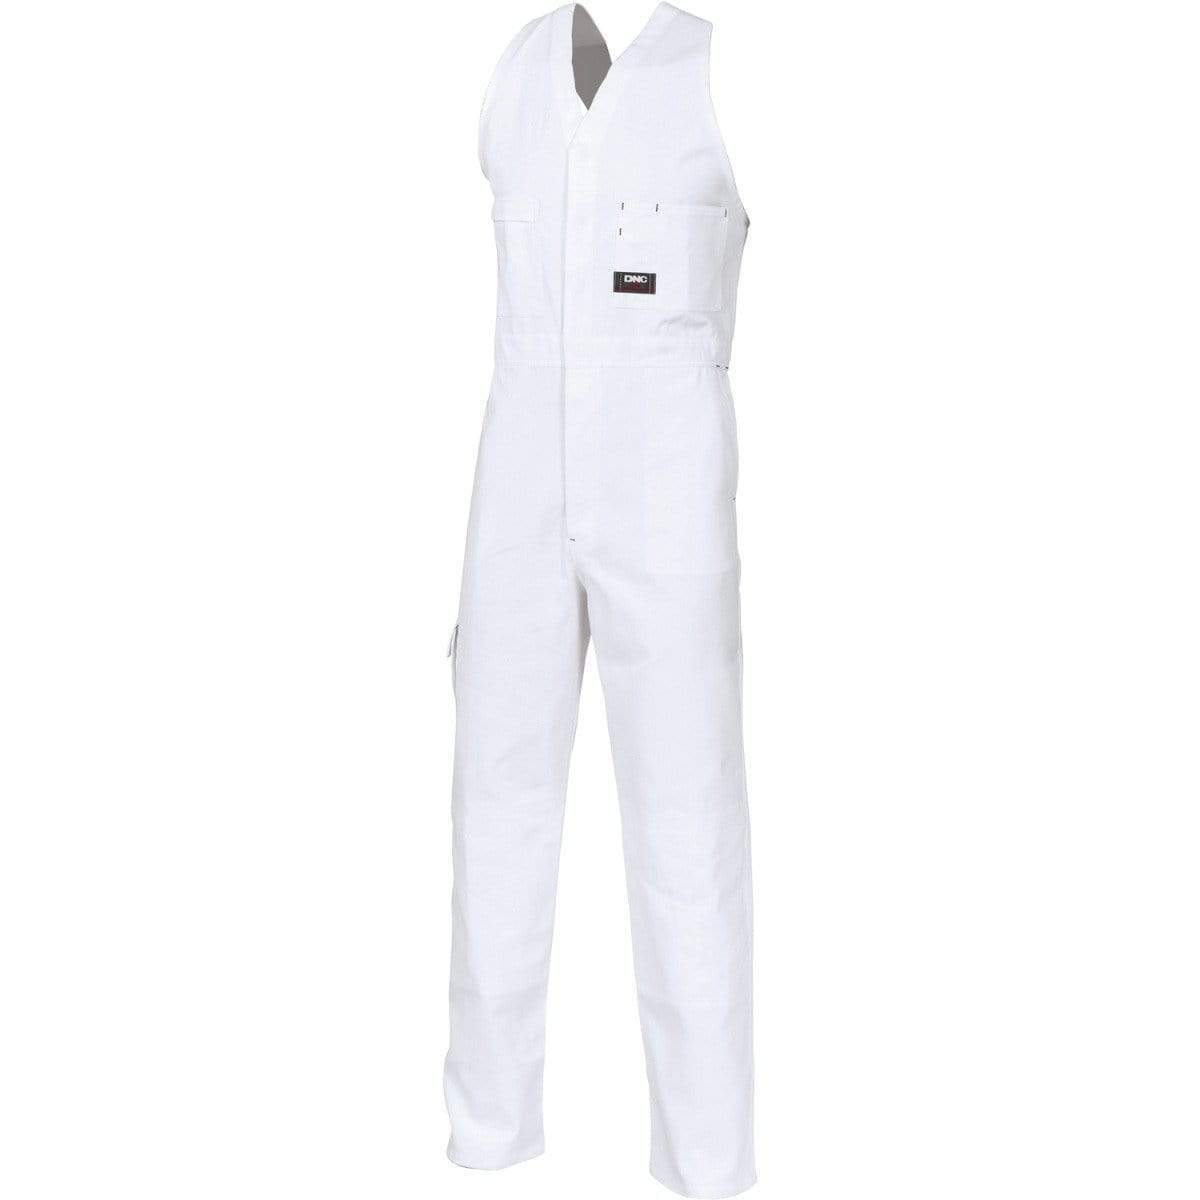 Dnc Workwear Cotton Drill Action Back Overall - 3121 Work Wear DNC Workwear White 77R 